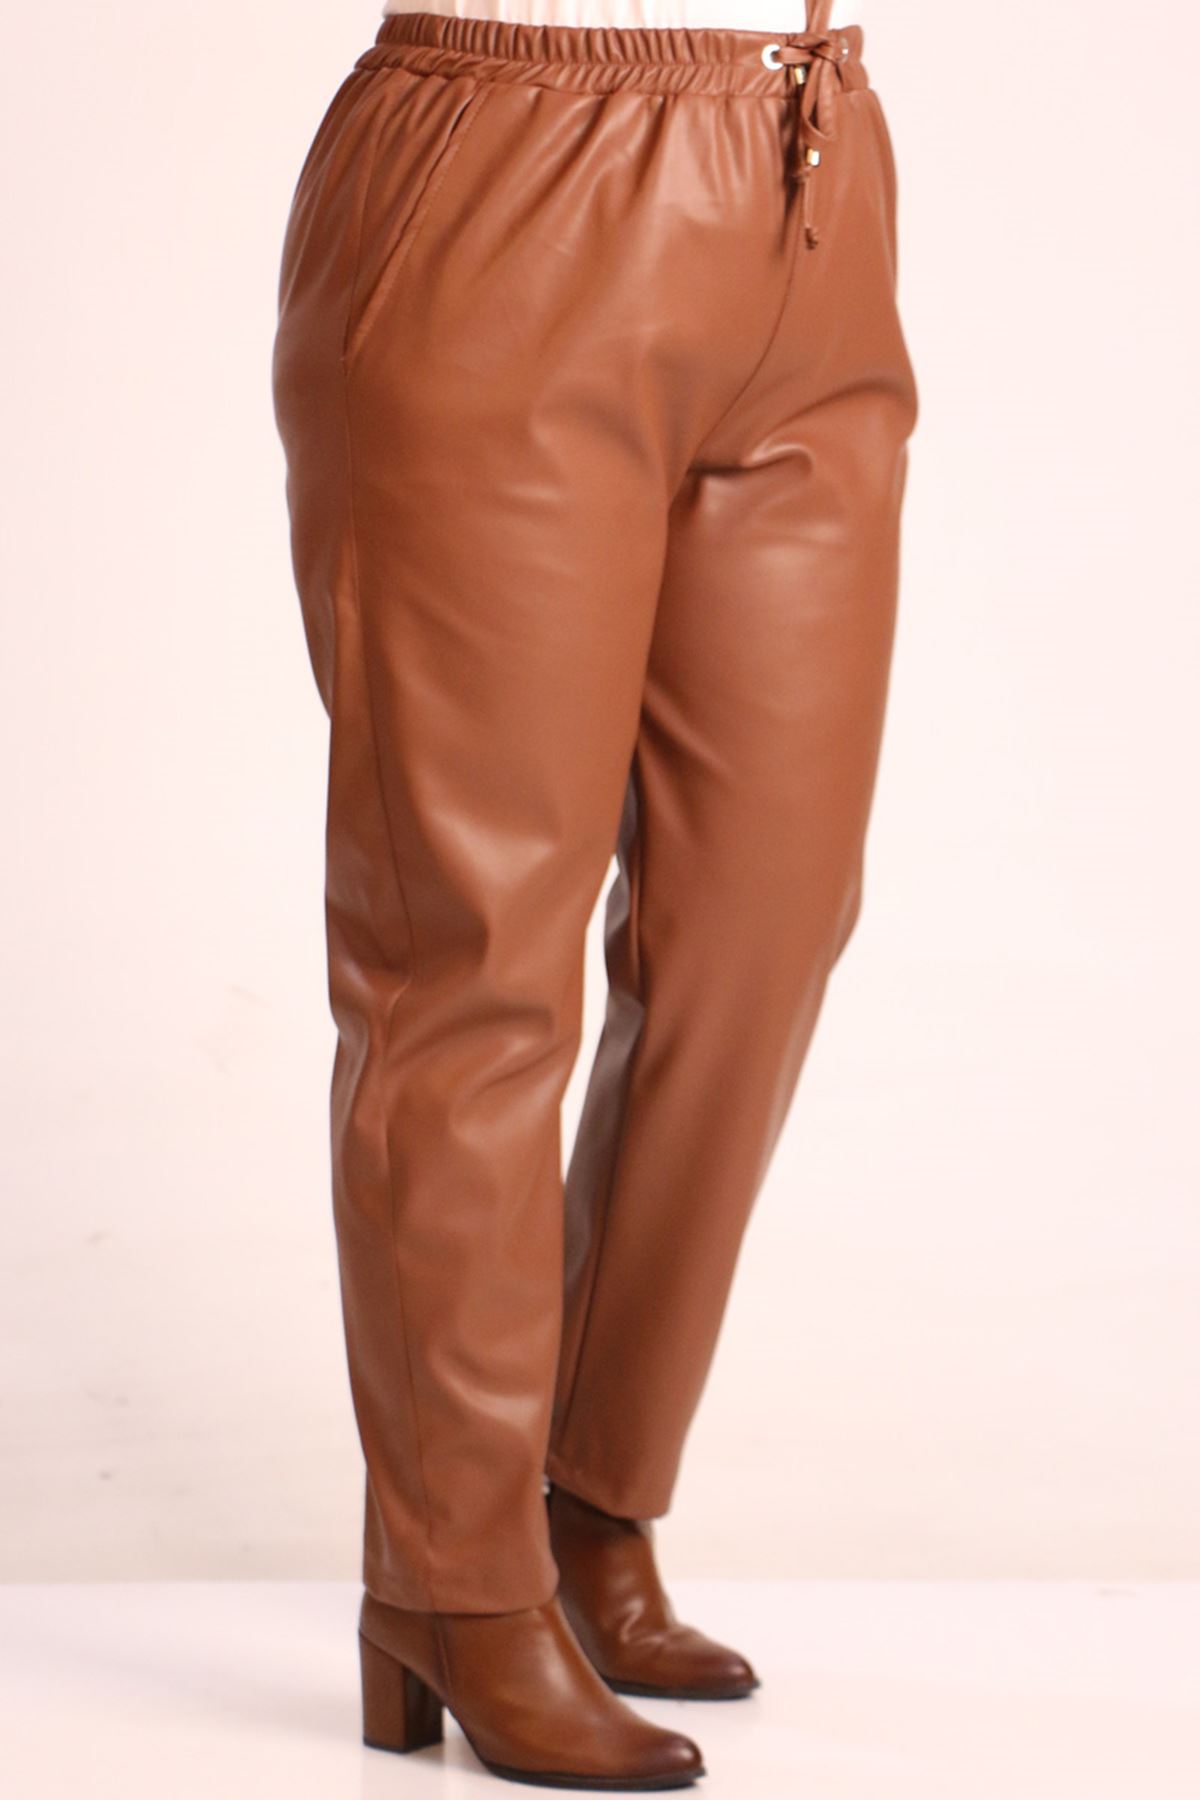 37045 Large Size Goose Feet Leather Combination Trousers Suit-Tan